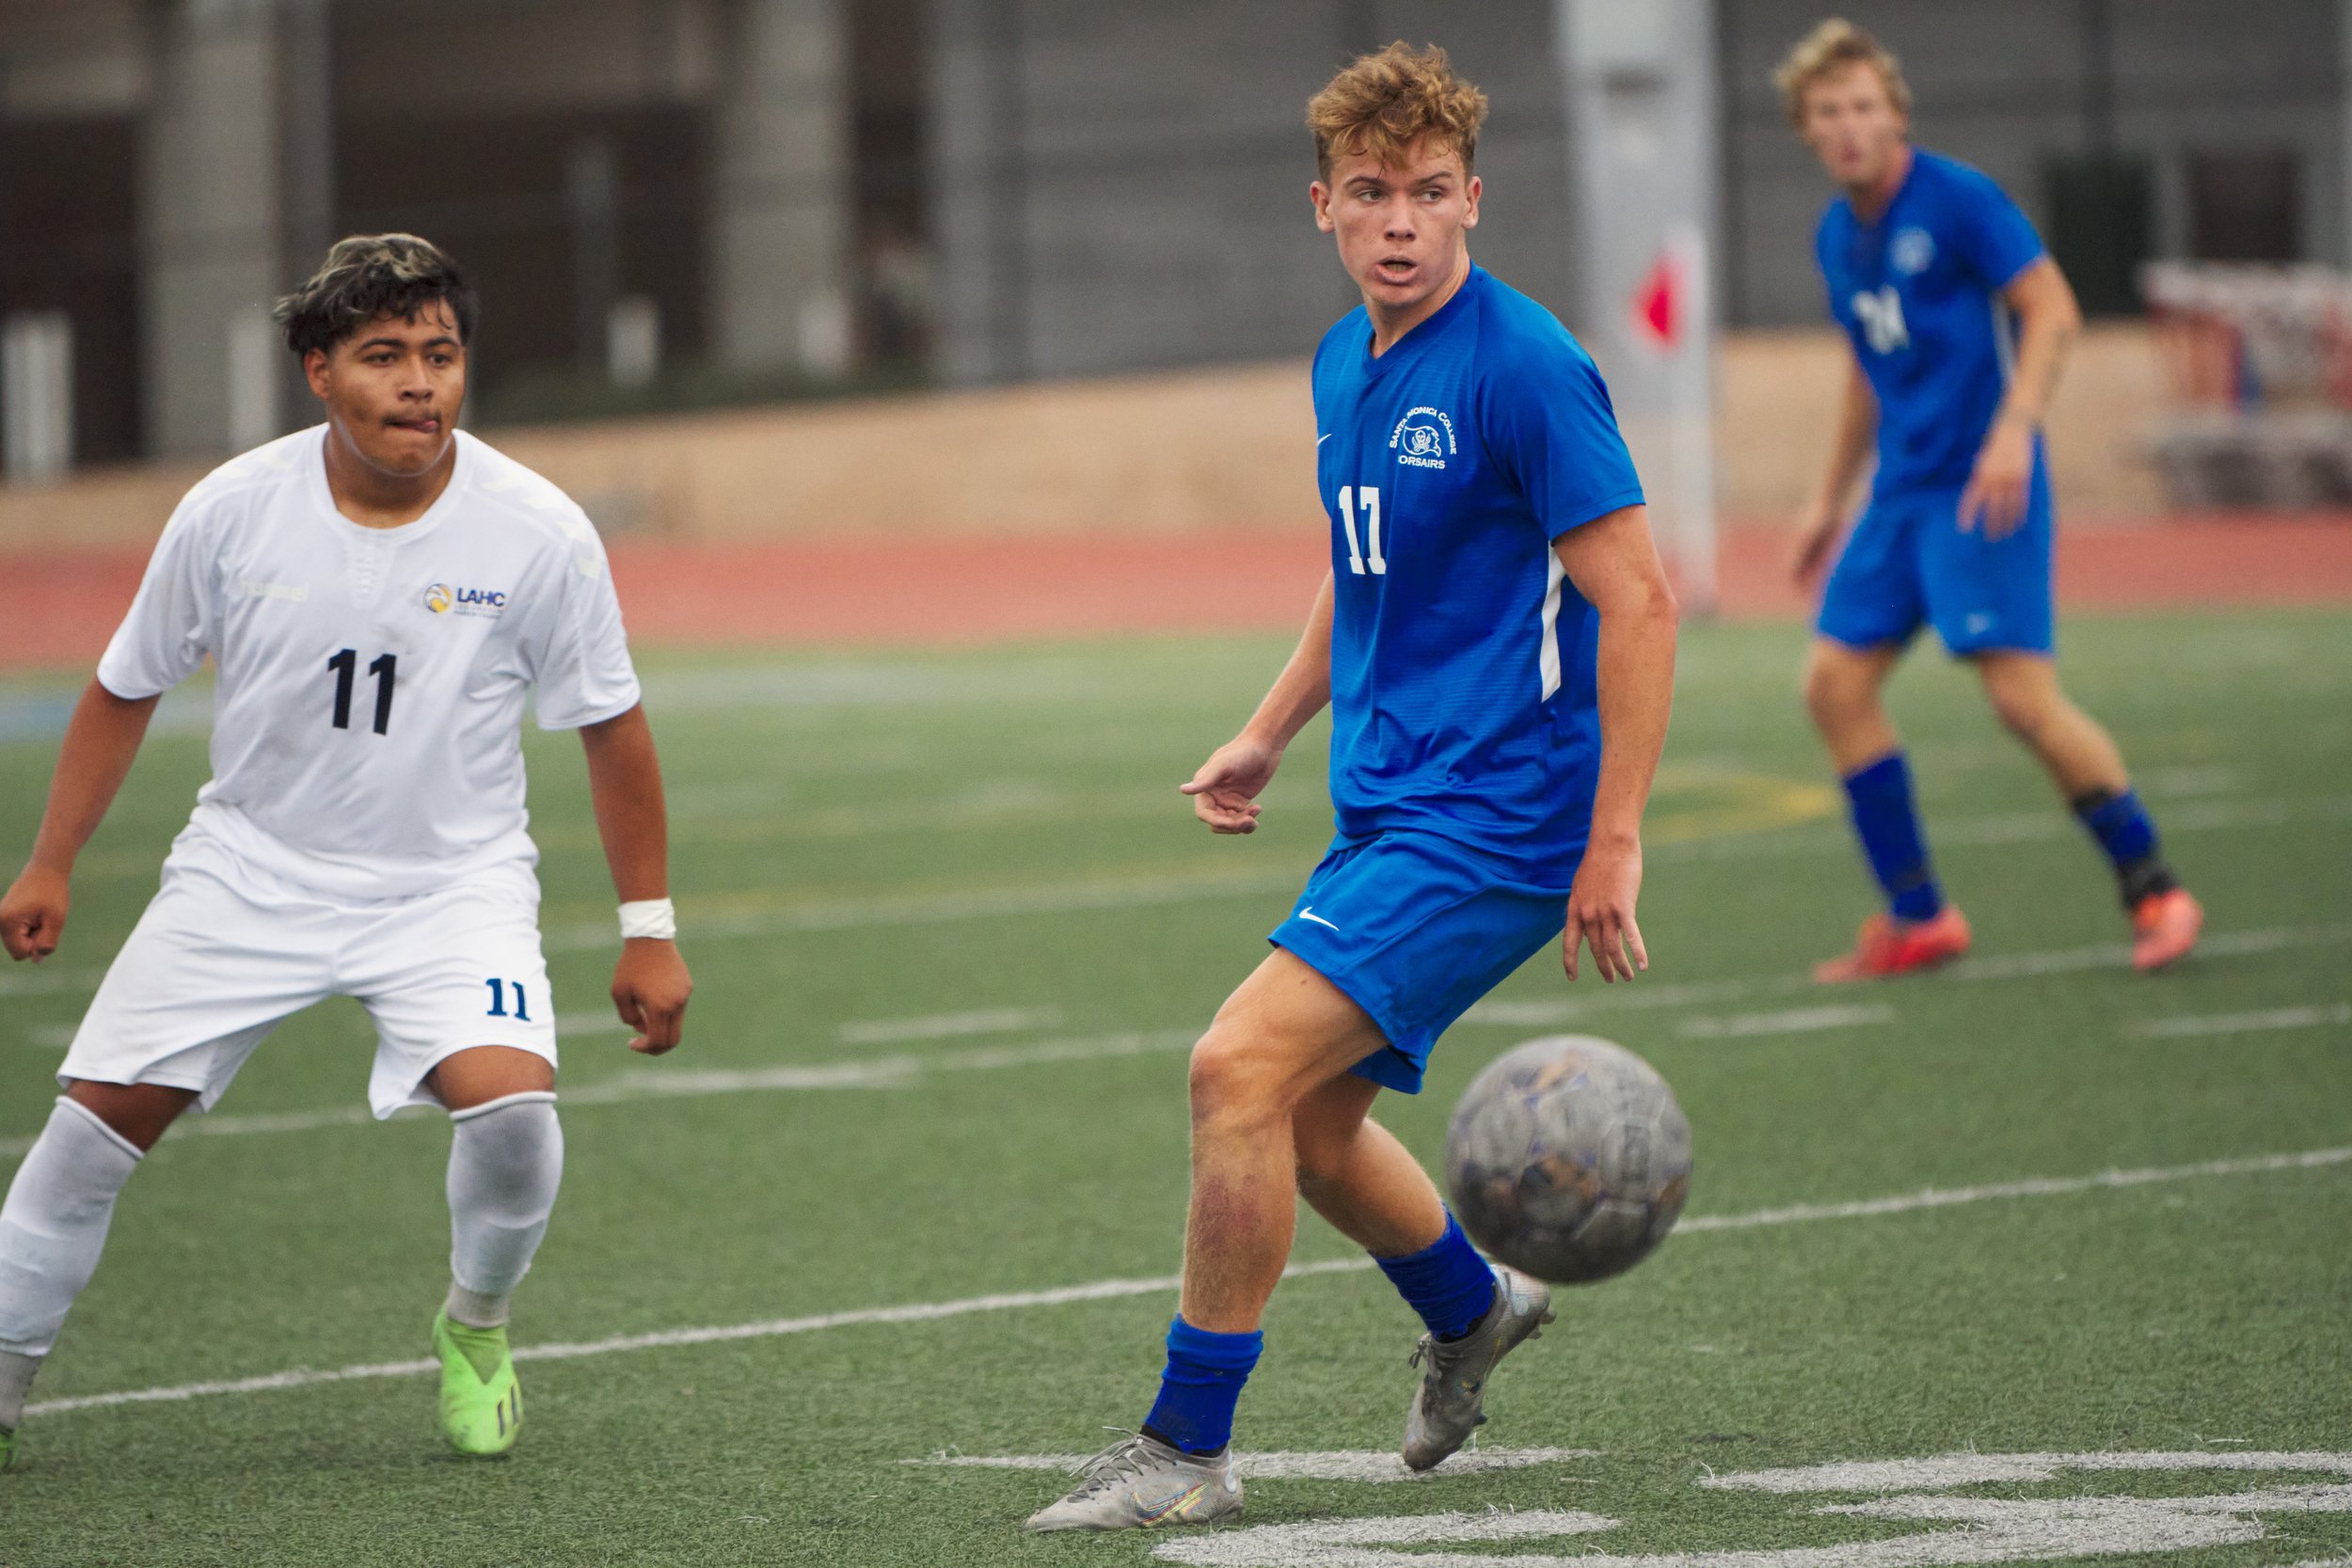  Taj Winnard (center), of the Santa Monica College Corsairs, and Arturo Benigno (left), of the Los Angeles Harbor College Seahawks, during the men's soccer match on Friday, September, 9, 2022, at Corsair Field in Santa Monica, Calif . The Corsairs wo